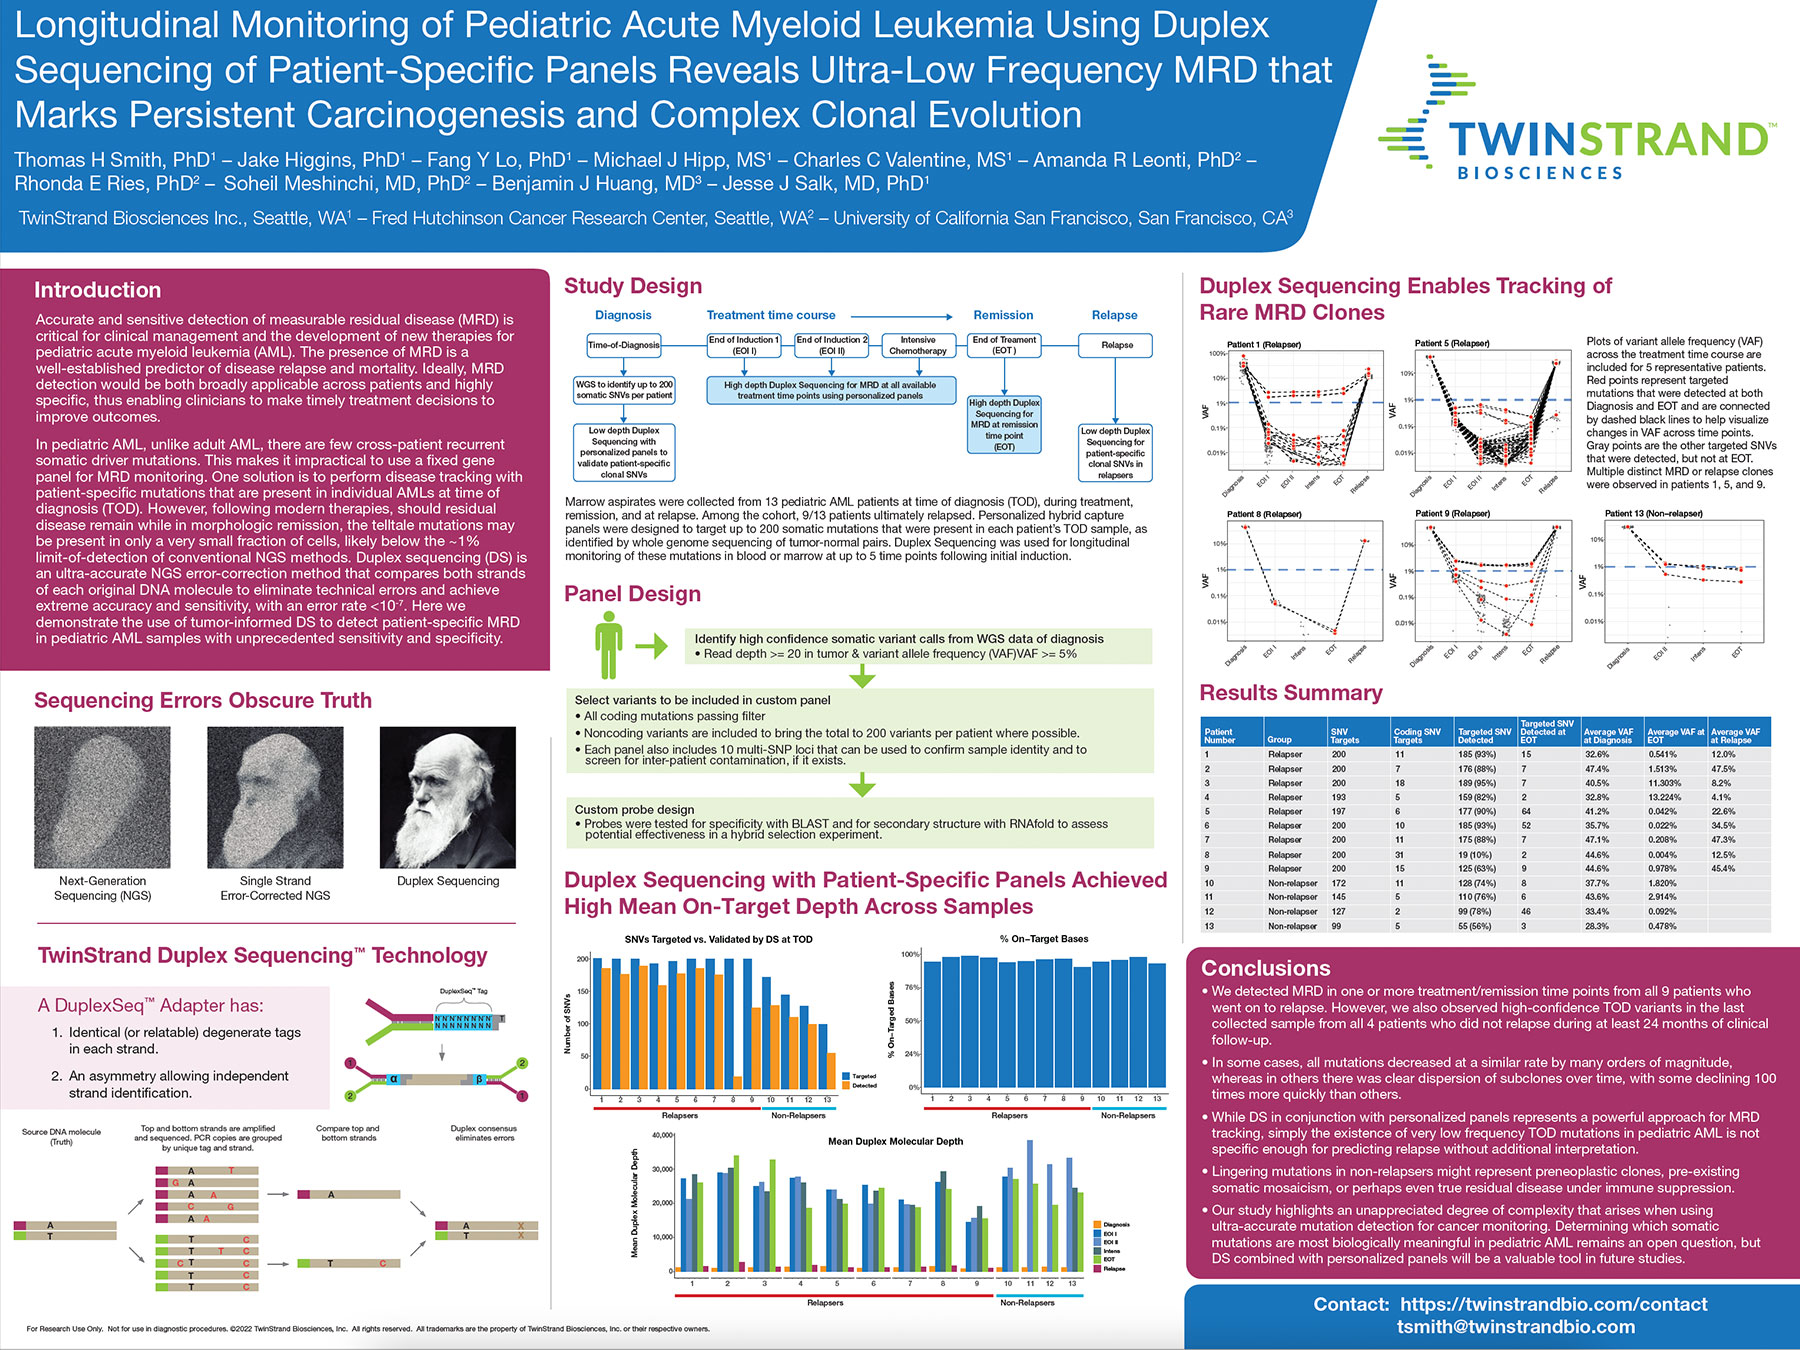 Longitudinal monitoring of pediatric acute myeloid leukemia using duplex sequencing of patient-specific panels reveals ultra-low frequency MRD that marks persistent carcinogenesis and complex clonal evolution